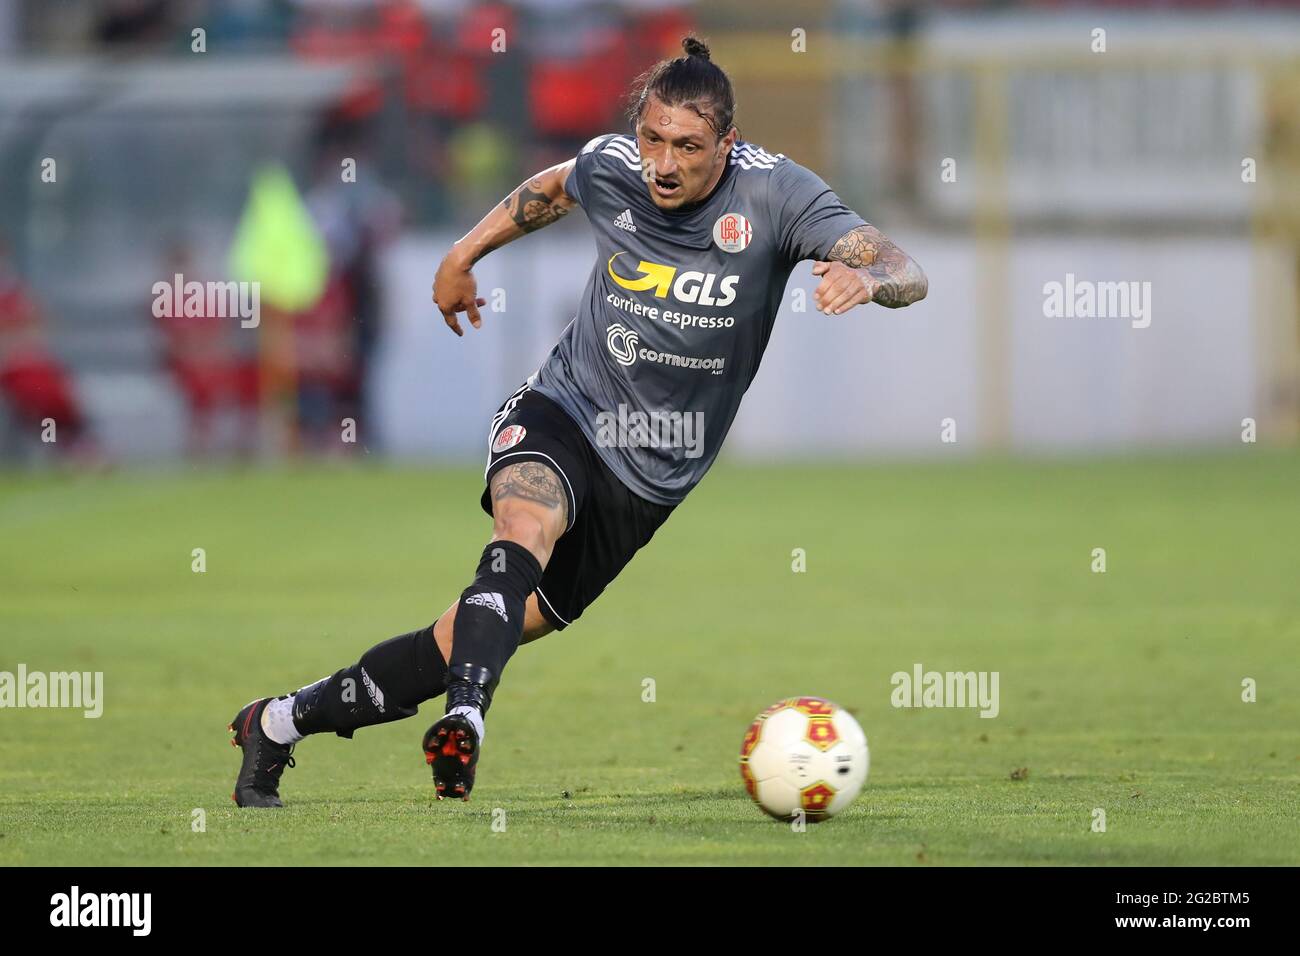 Alessandria, Italy, 9th June 2021. Mattia Mustacchio of US Alessandria during the Serie C match at Stadio Giuseppe Moccagatta - Alessandria, Torino. Picture credit should read: Jonathan Moscrop / Sportimage Credit: Sportimage/Alamy Live News Stock Photo